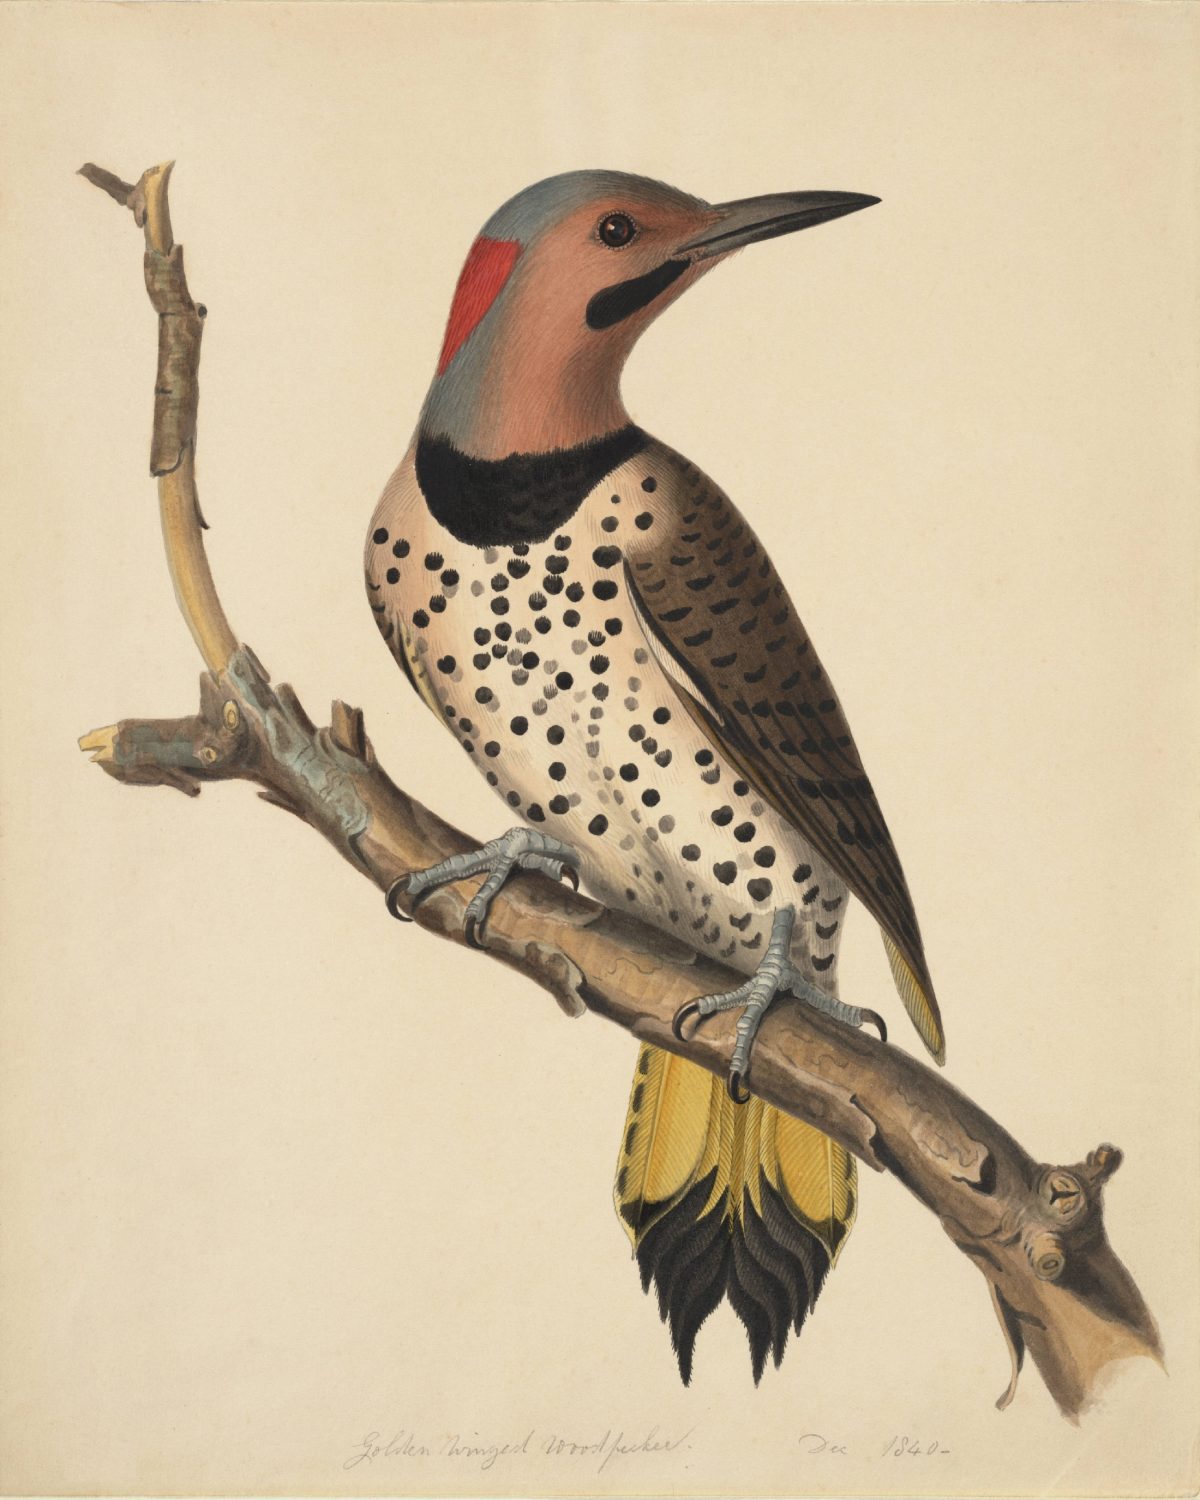 Golden Winged Woodpecker"A single bird is shown perched on a bare branch. 'Golden winged woodpecker' and the date are inscribed in graphite at the bottom of the sheet below the image. The bird depicted is now known as the yellow-shafted flicker"